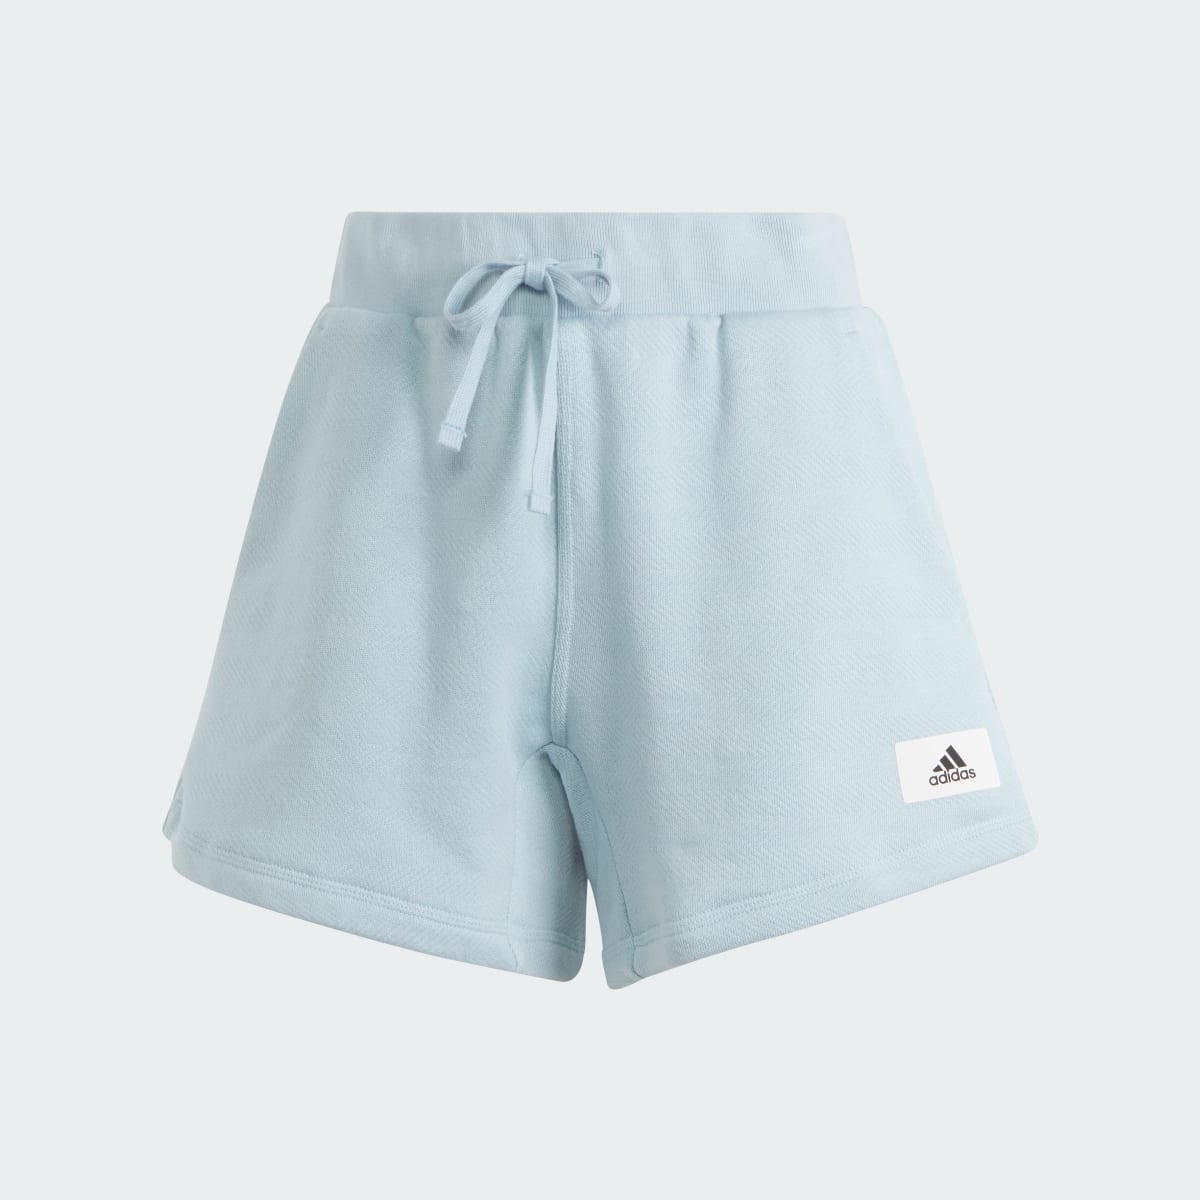 Adidas Lounge French Terry Shorts. 4